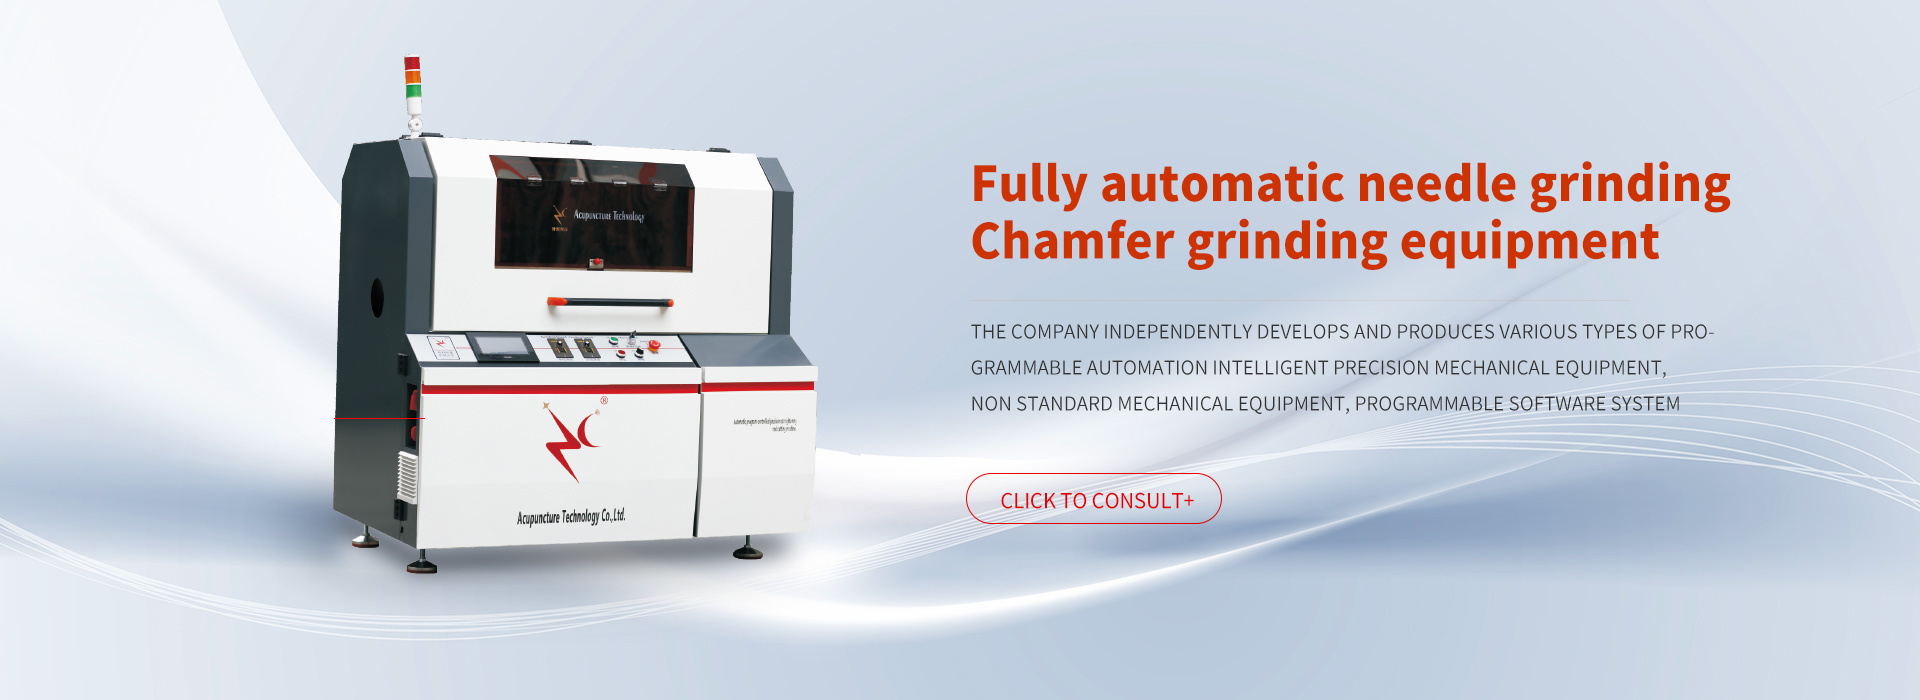 Automatic Needle Grinding Chamfer Grinding Equipment